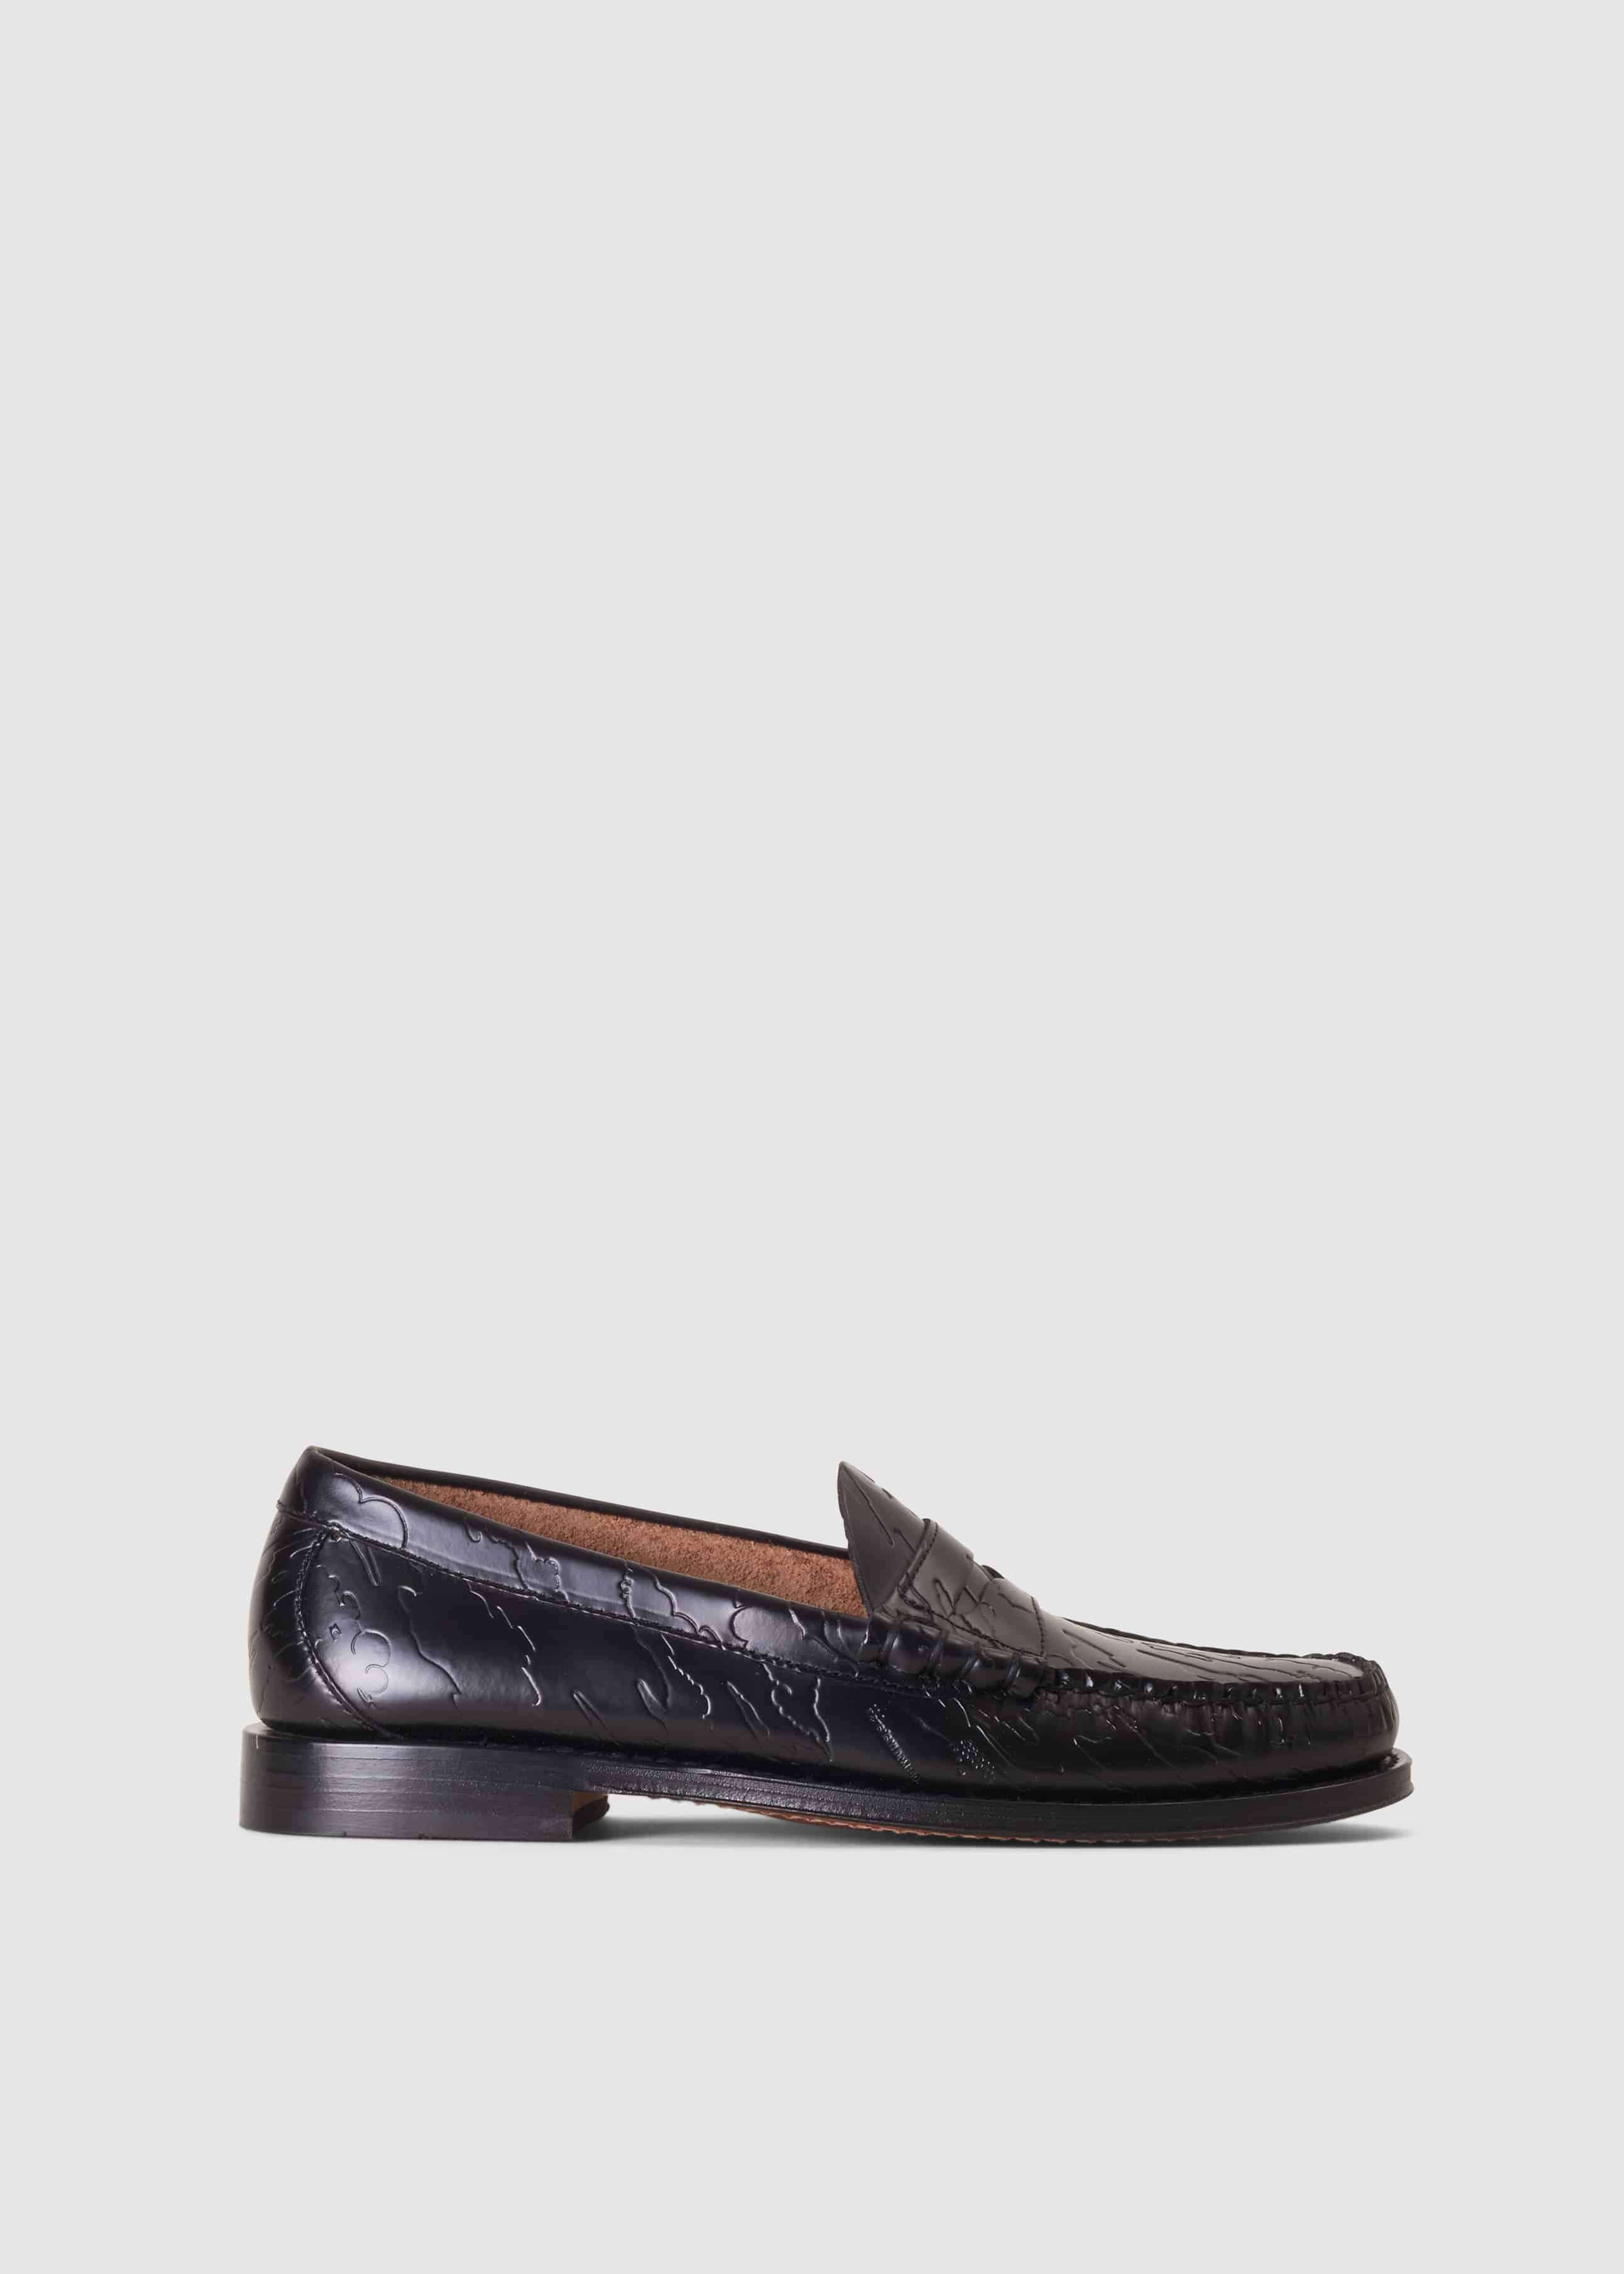 Image of G.H.Bass Mens Weejun Heritage Larson X Maharishi Embossed Leather Penny Loafers In Black